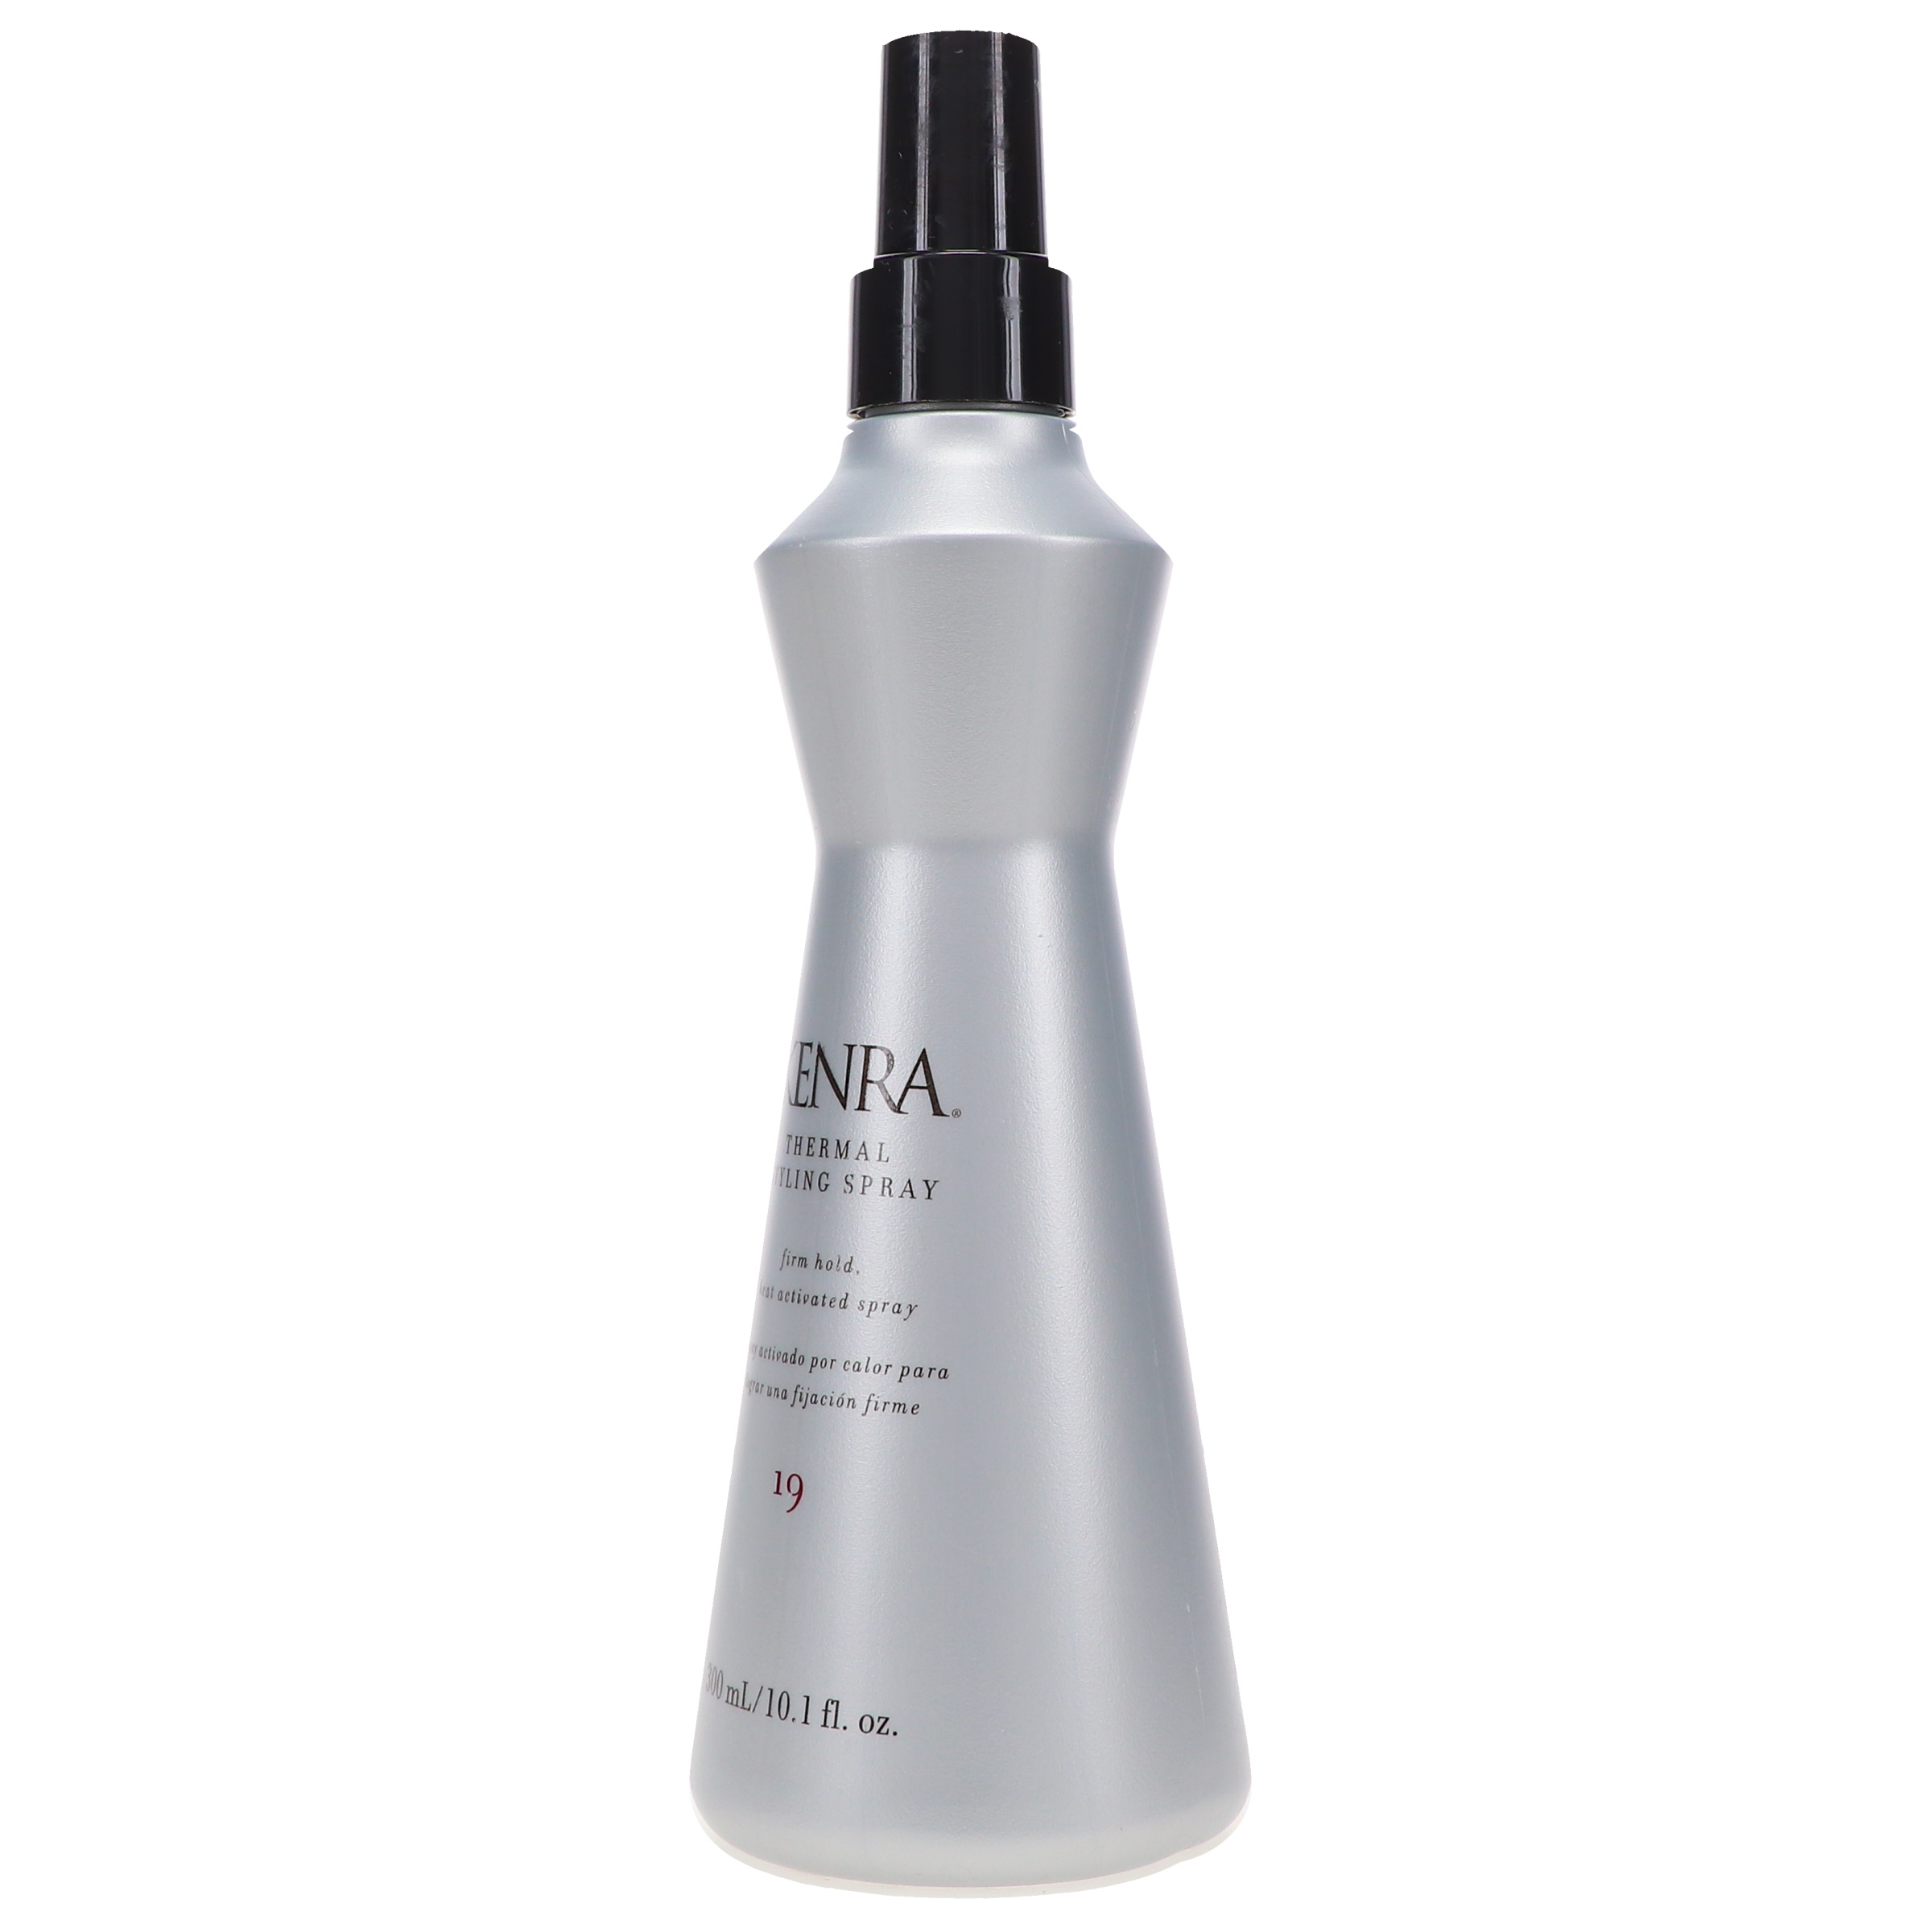 Kenra Thermal Styling Spray #19 10.1 oz - image 2 of 8